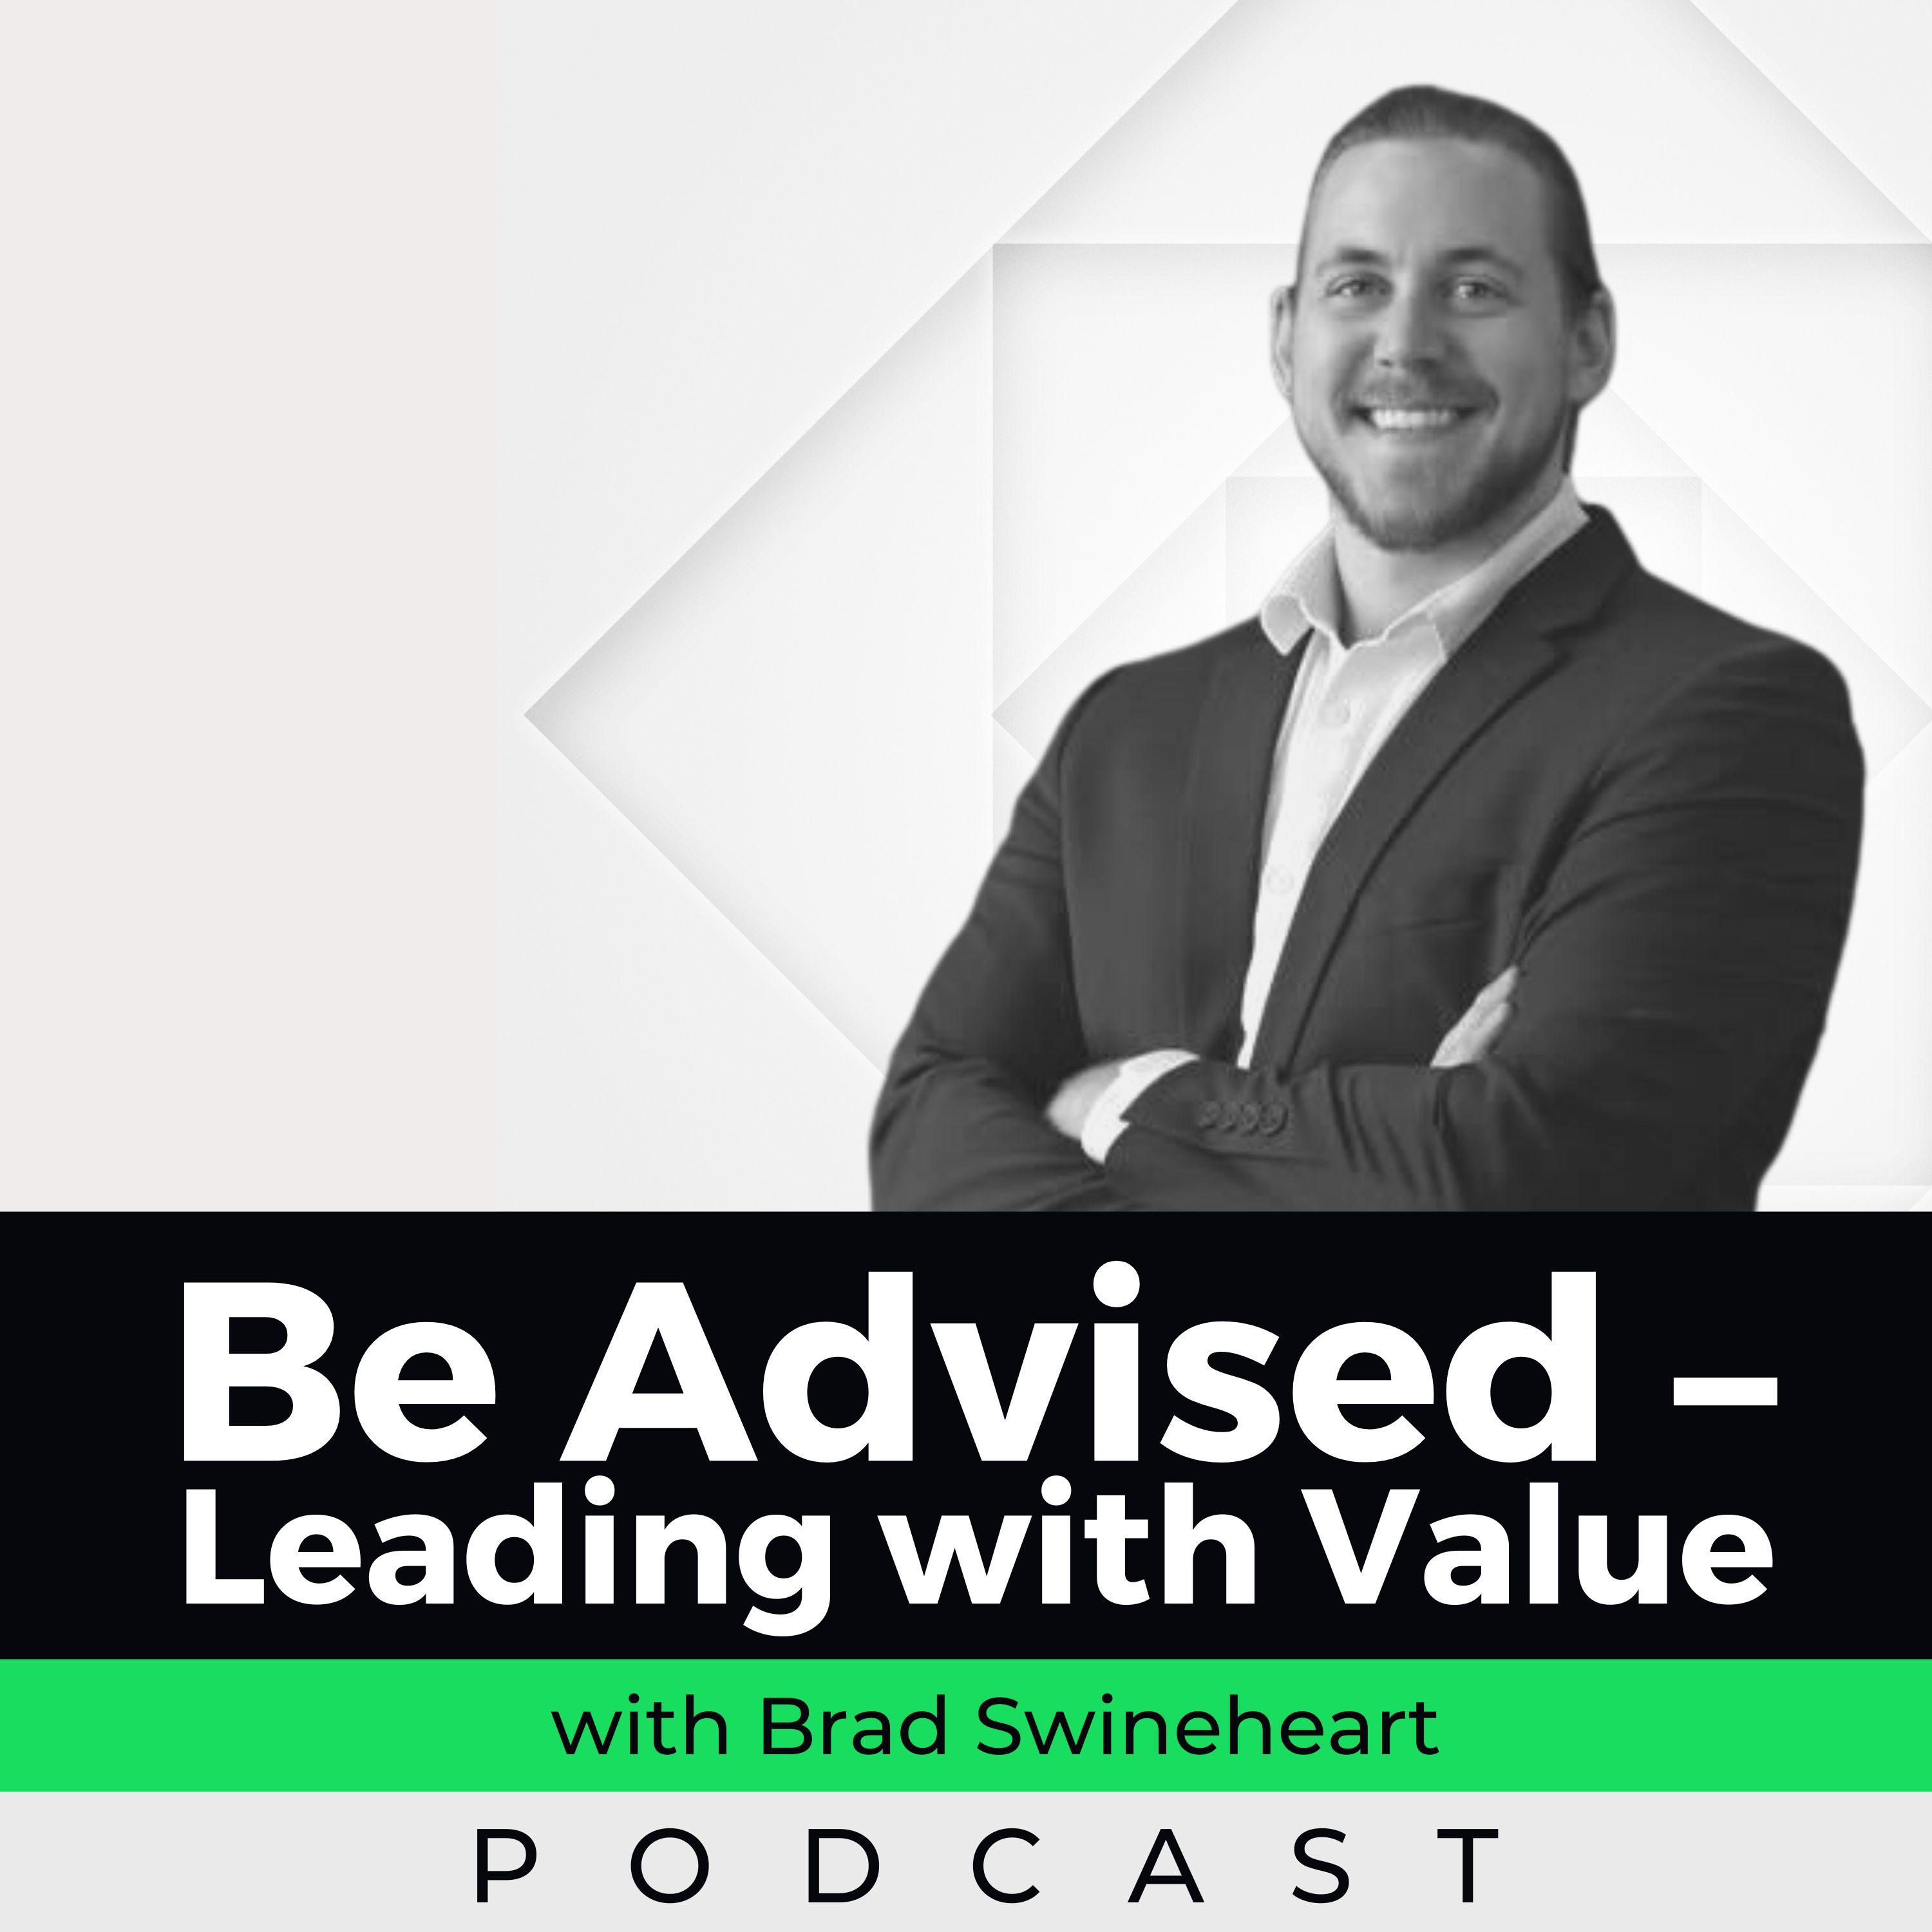 Be Advised - Leading with Value